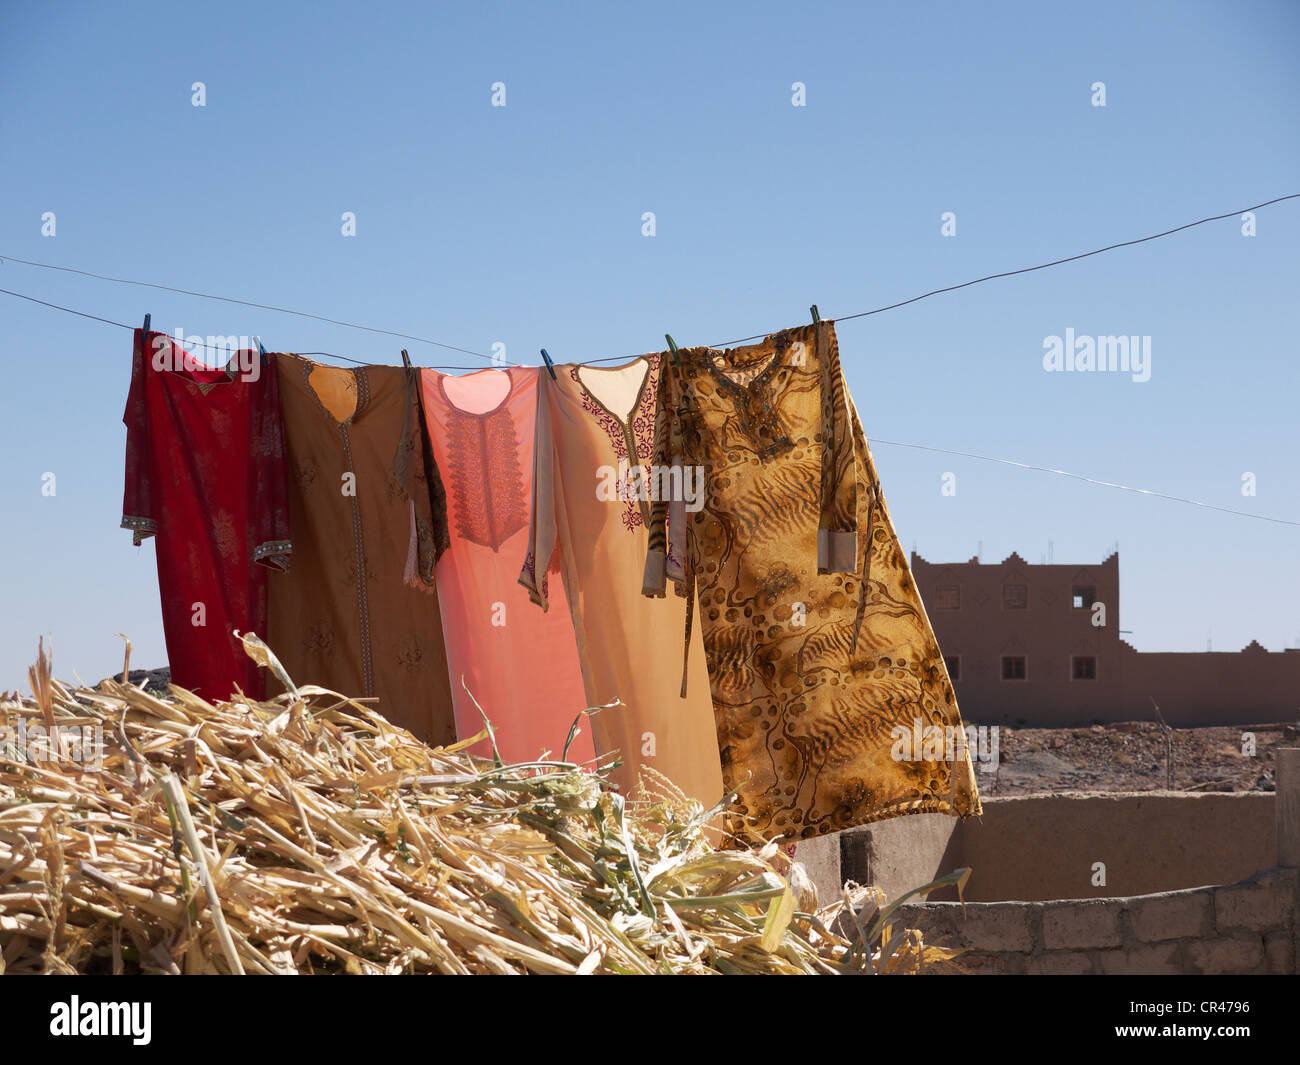 Colorful caftans hanging on a clothesline, Ouarzazate, Morocco, North Africa, Africa Stock Photo